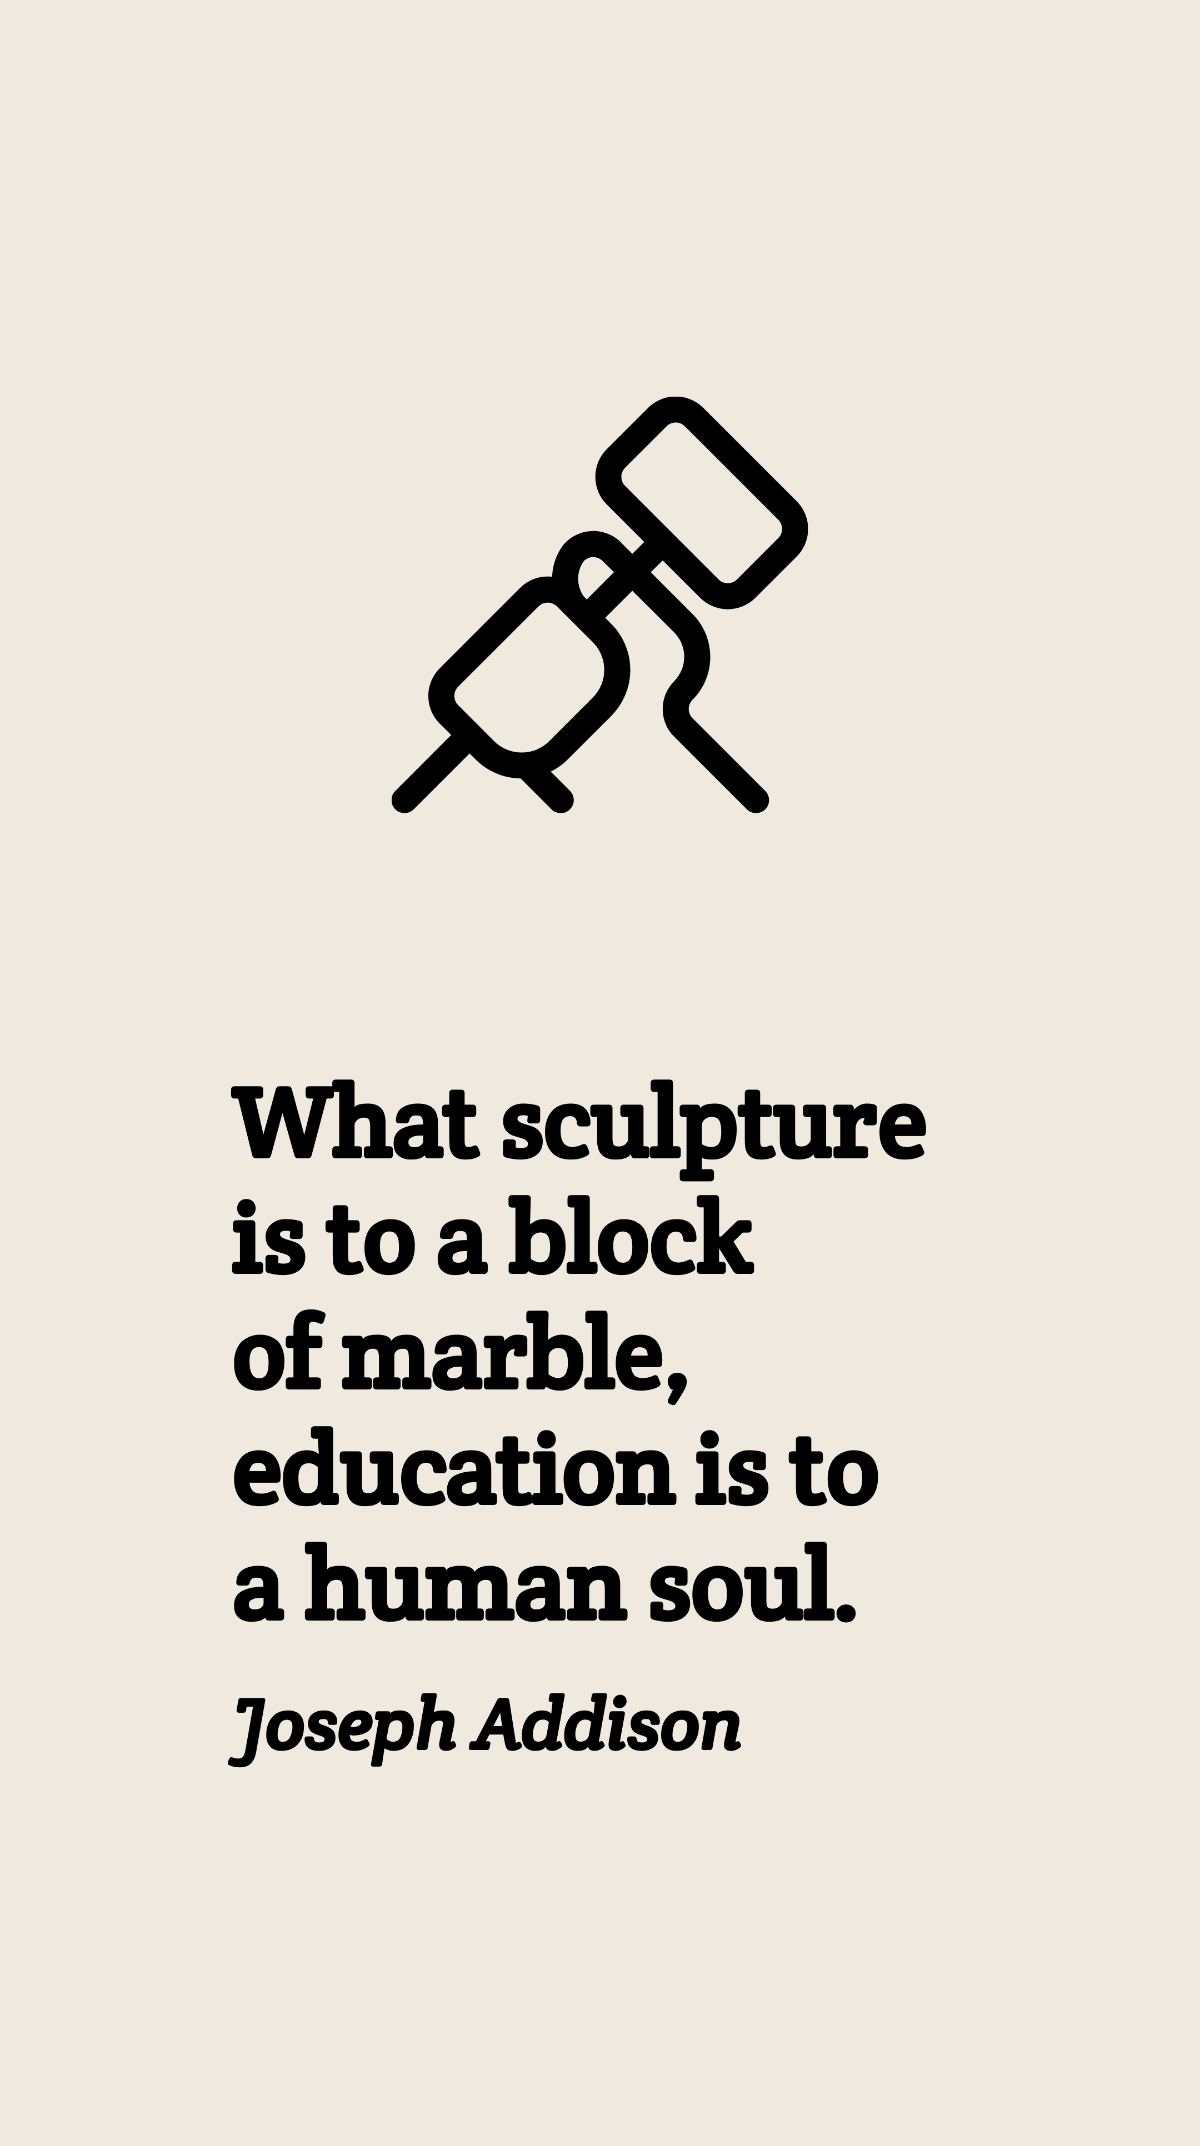 Joseph Addison - What sculpture is to a block of marble, education is to a human soul. Template